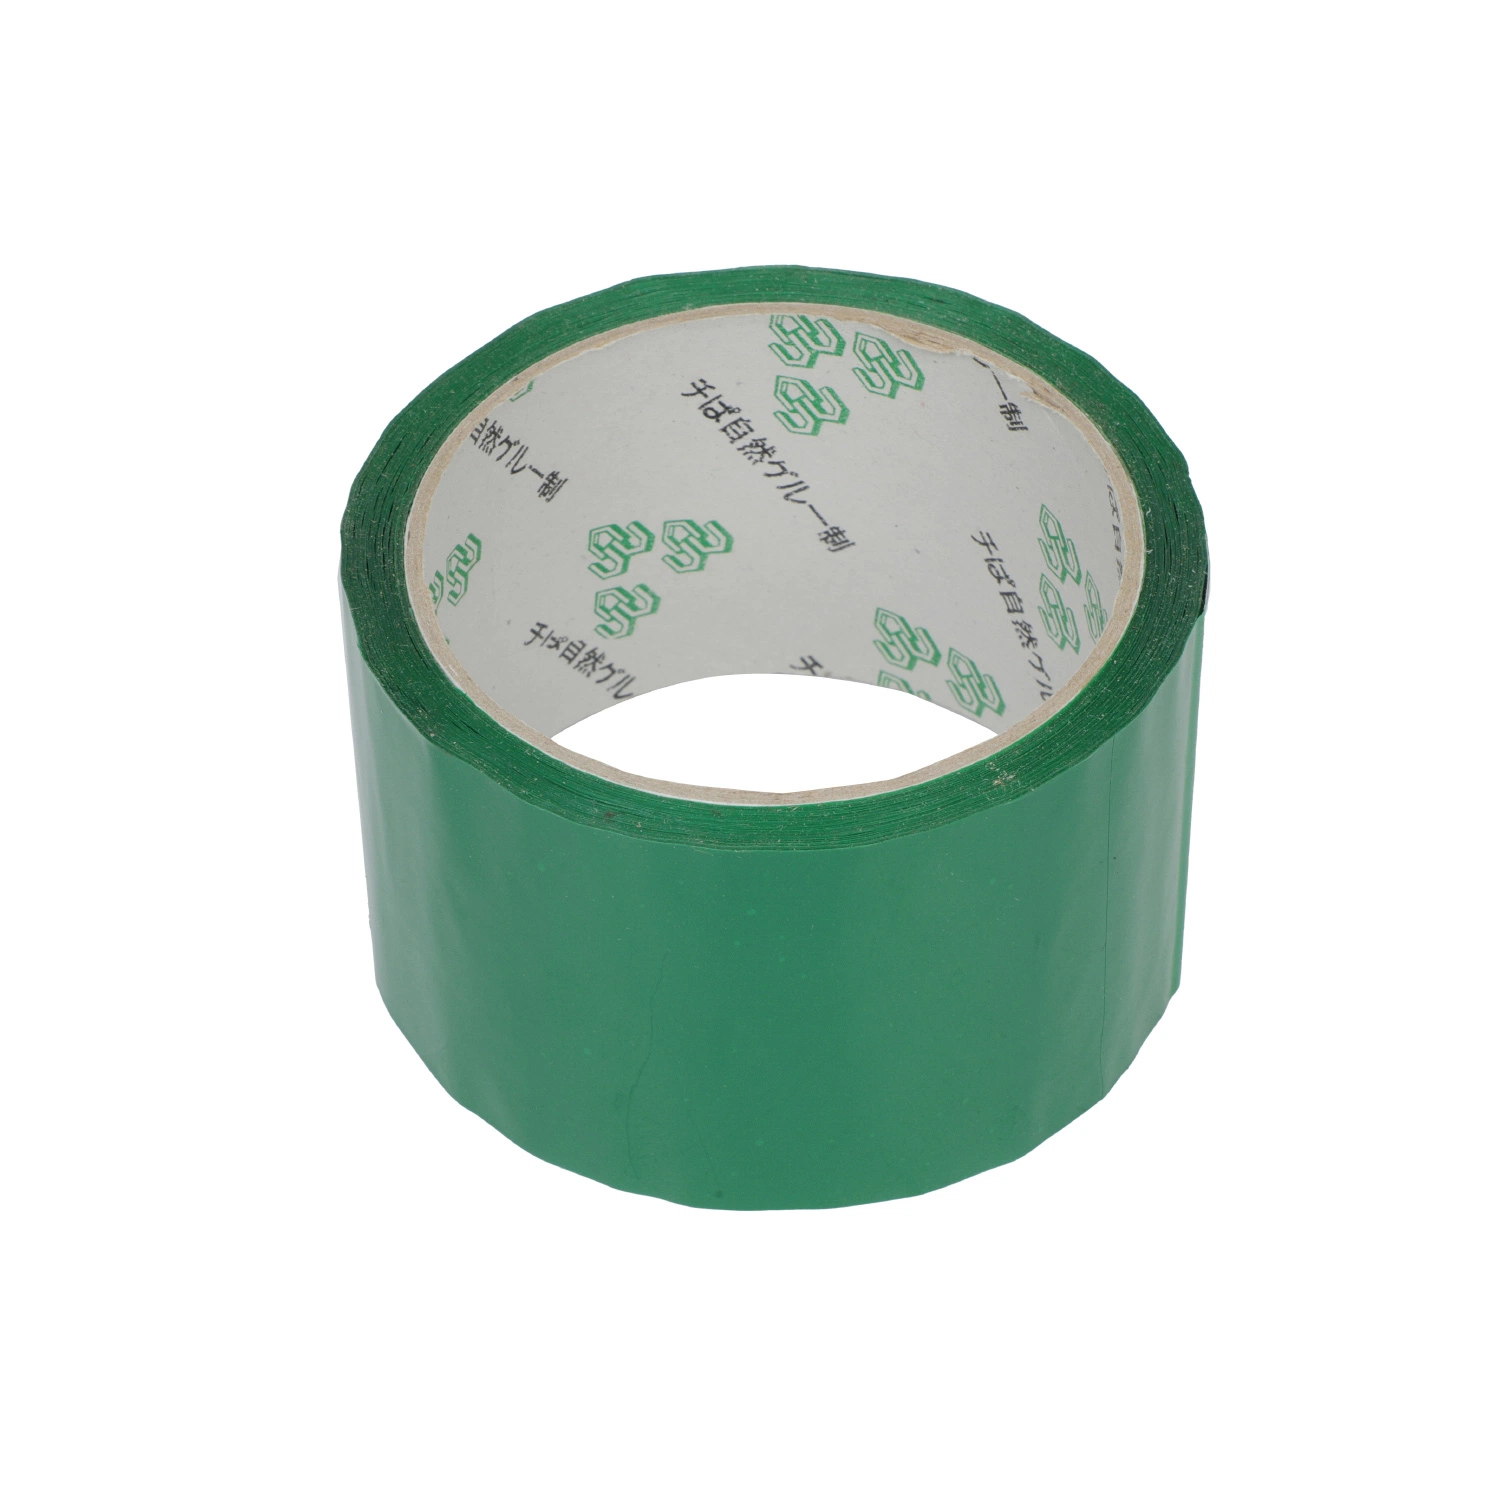 Heavy Duty Clear Transparent Packing Tape for Carton Sealing, Bag Sealing, Moving, Office, Warehouse, Tape Gun Refills